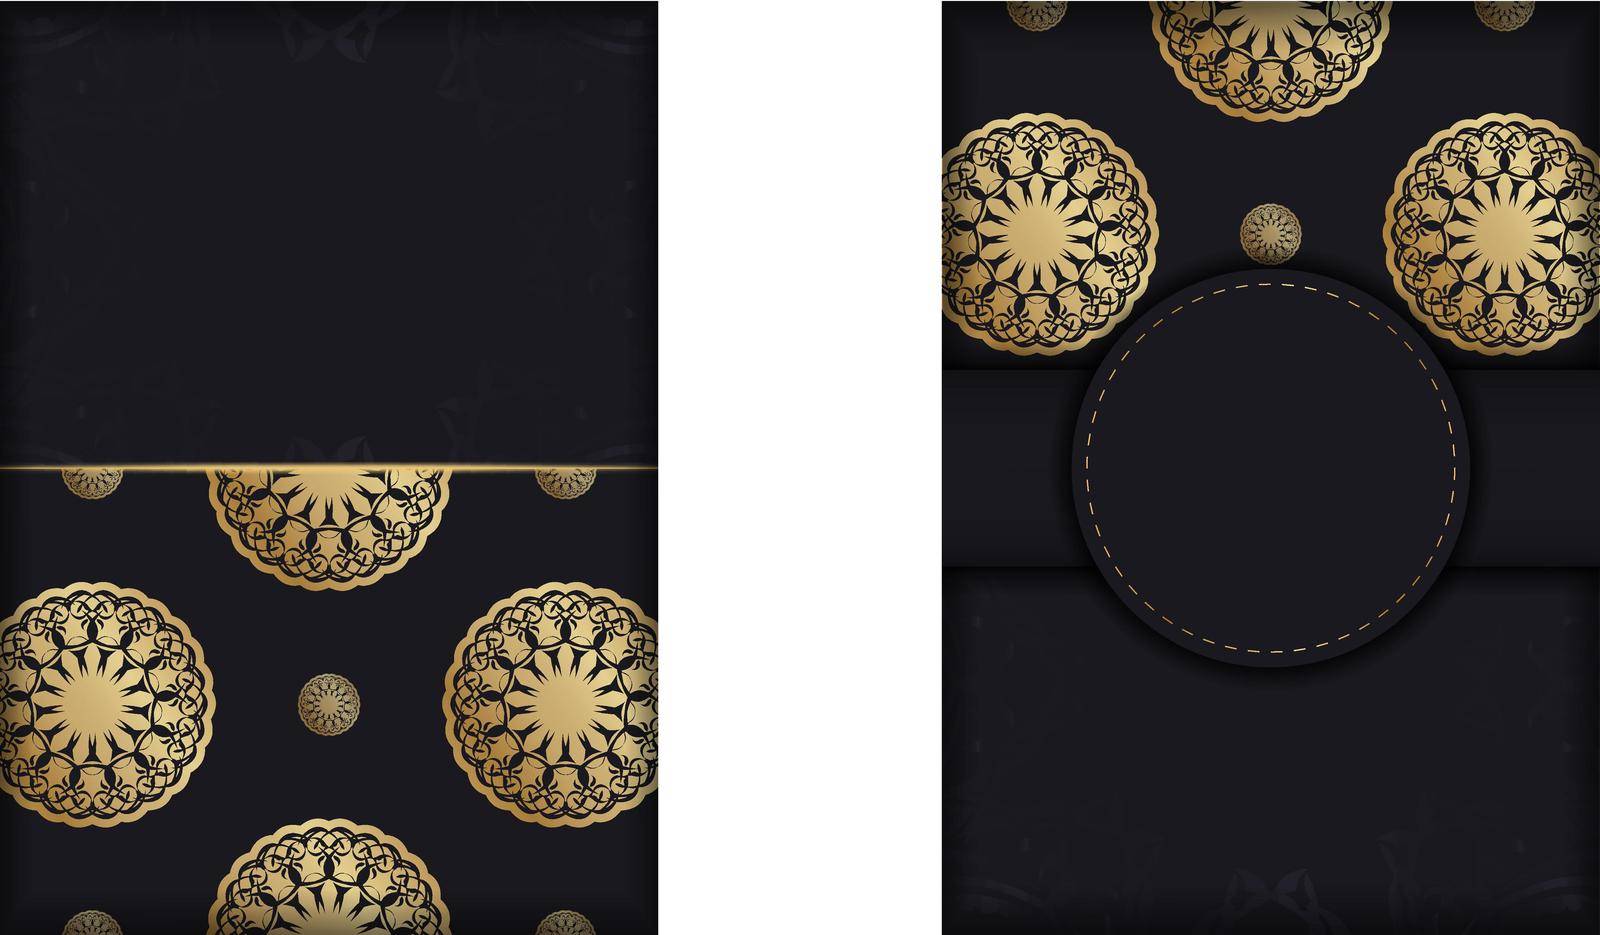 Black postcard with luxurious gold ornamentation is ready for printing.